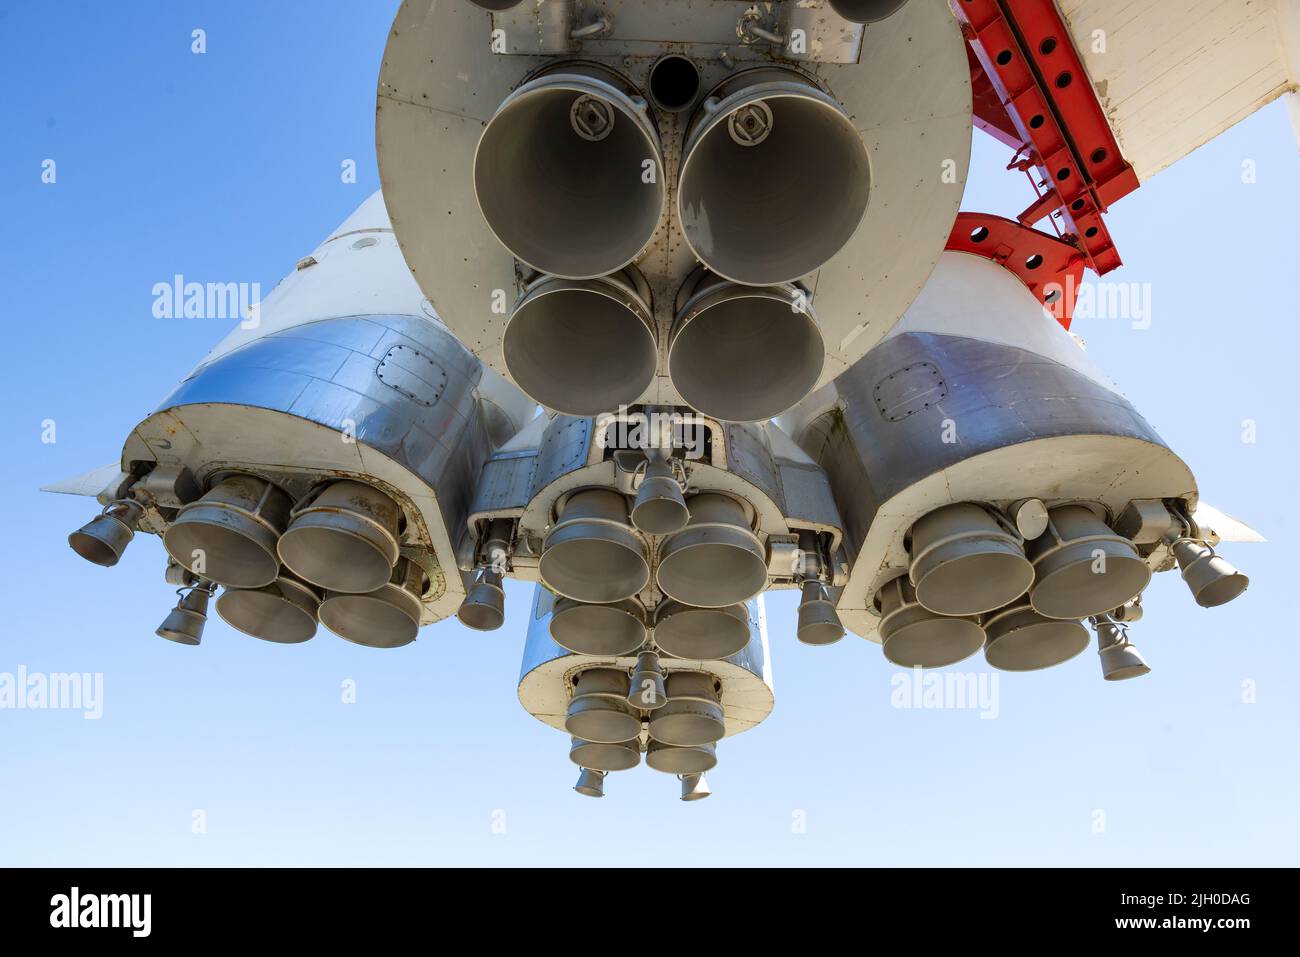 KALUGA, RUSSIA - JUNE 25, 2022: Space rocket nozzles close-up on a sunny day. State Museum of Cosmonautics Stock Photo